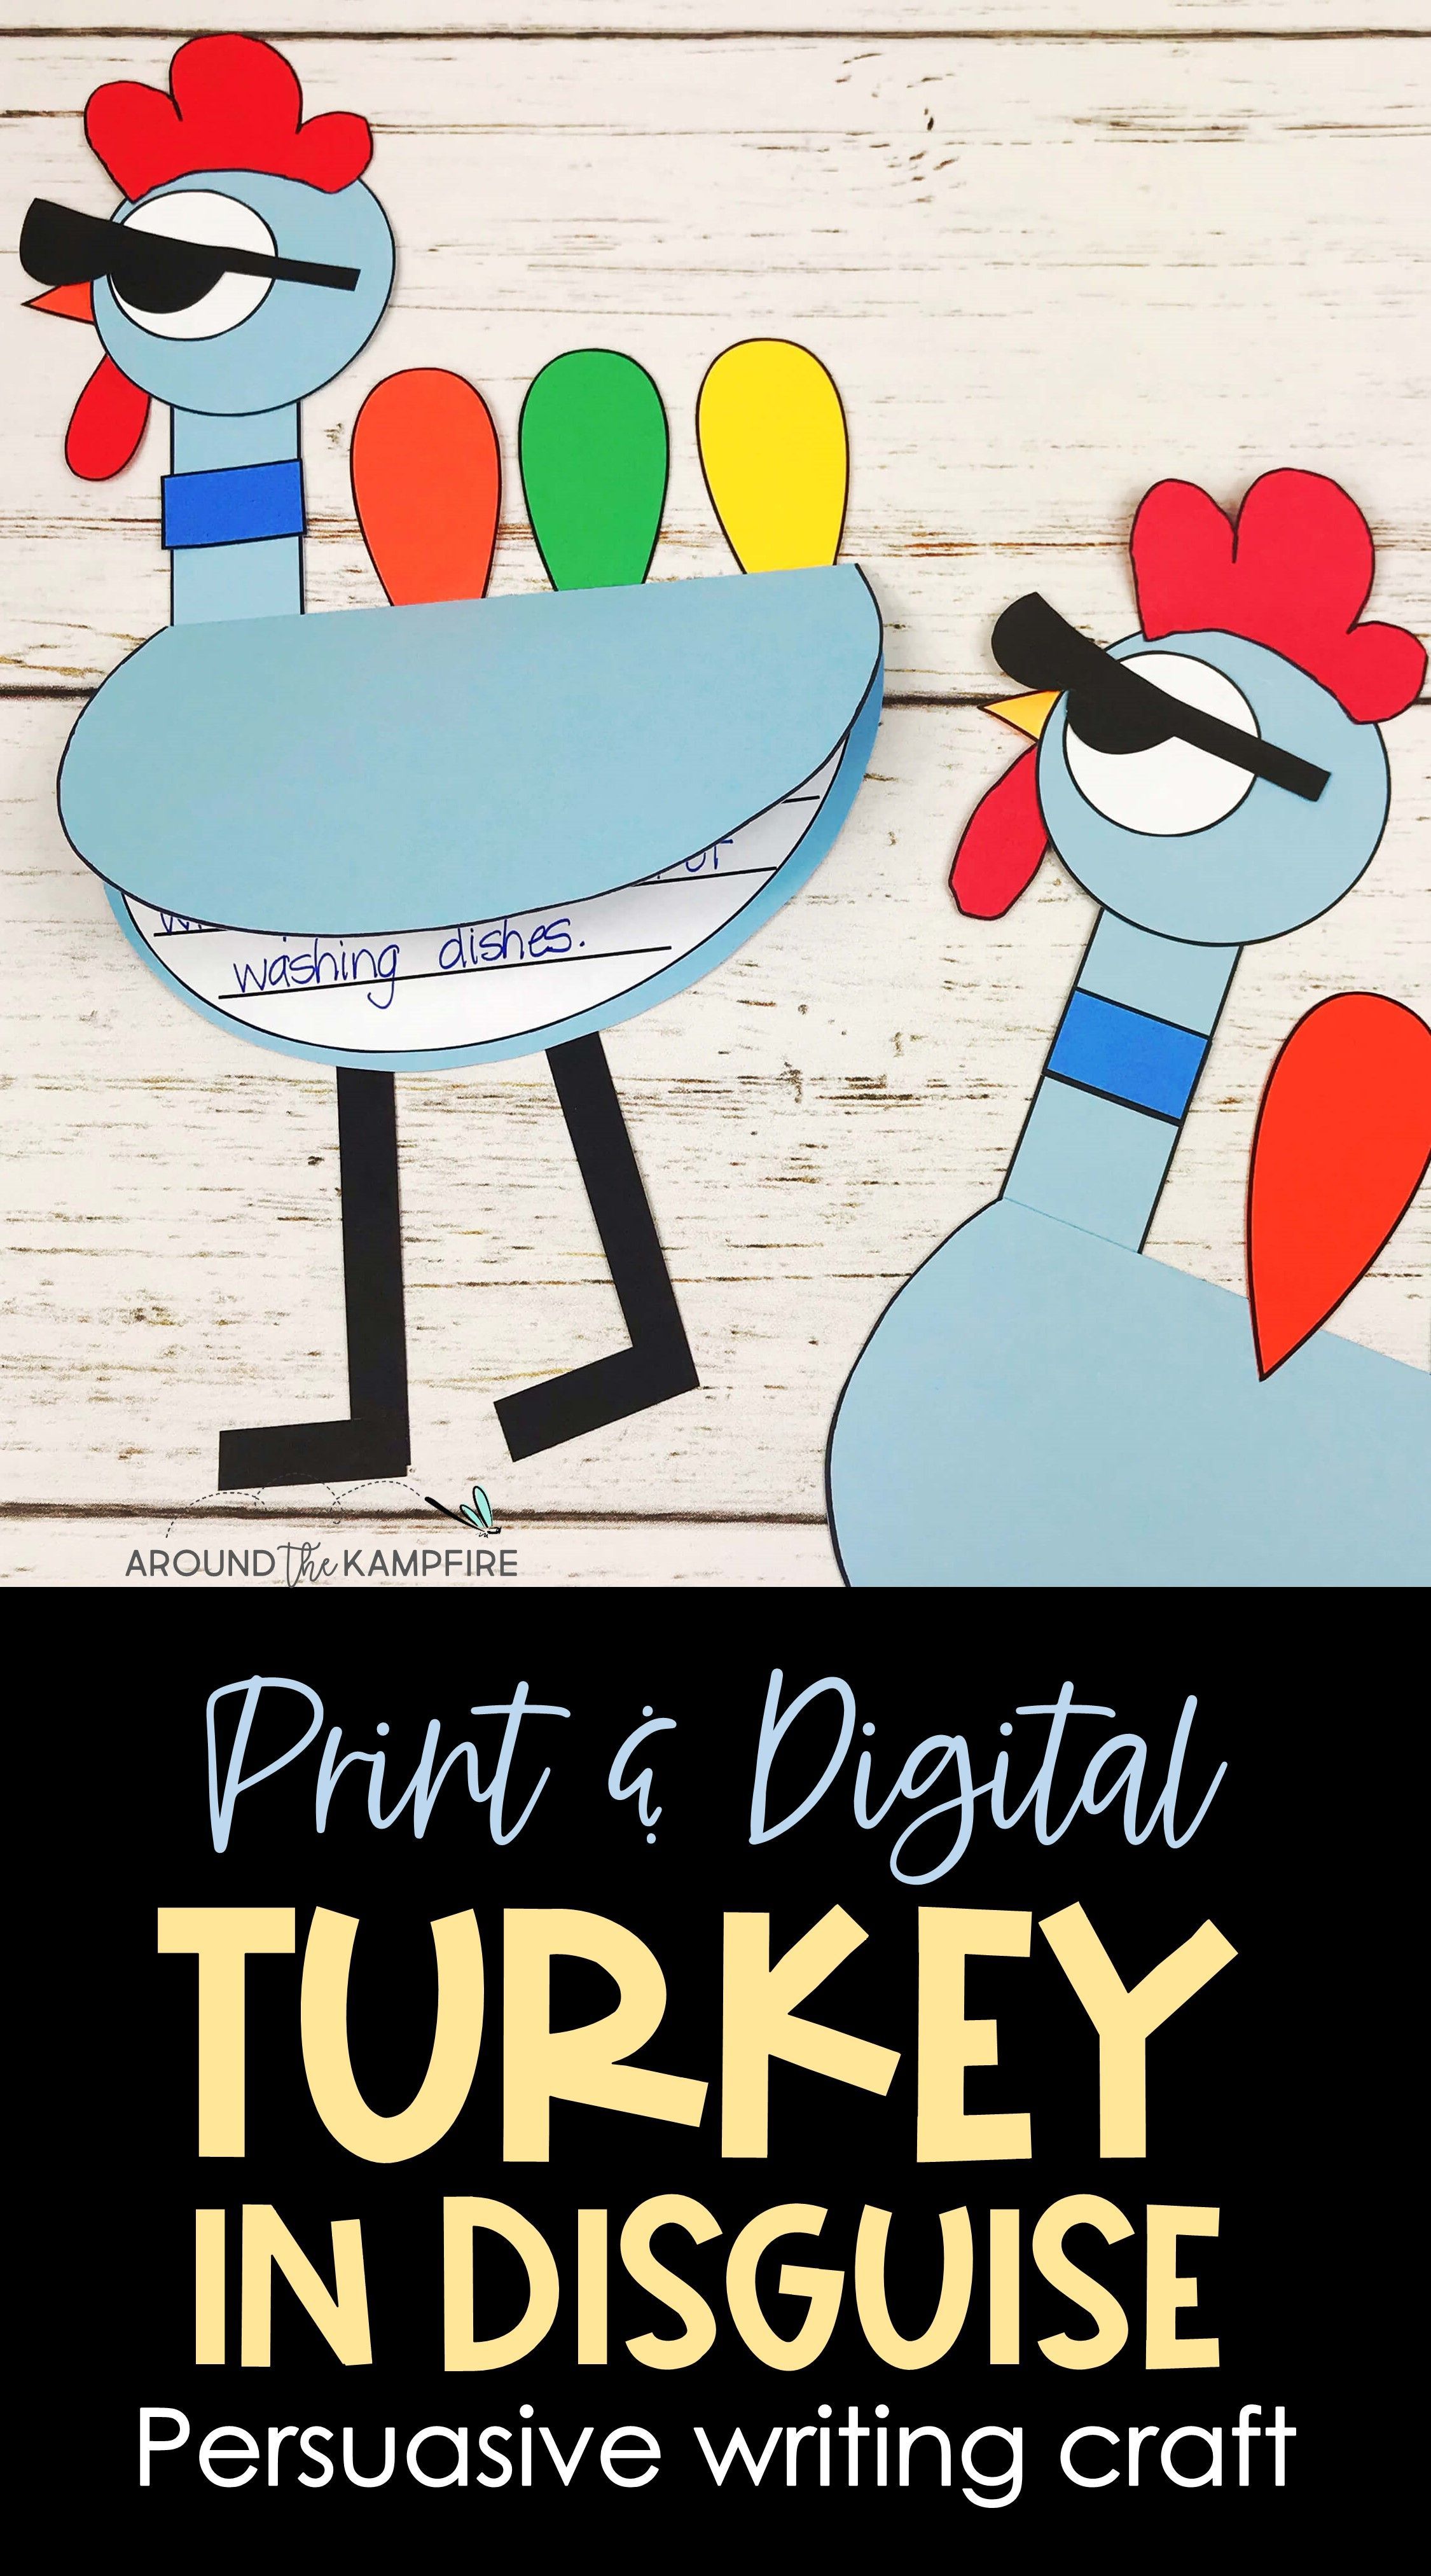 18 turkey disguise project template student ideas